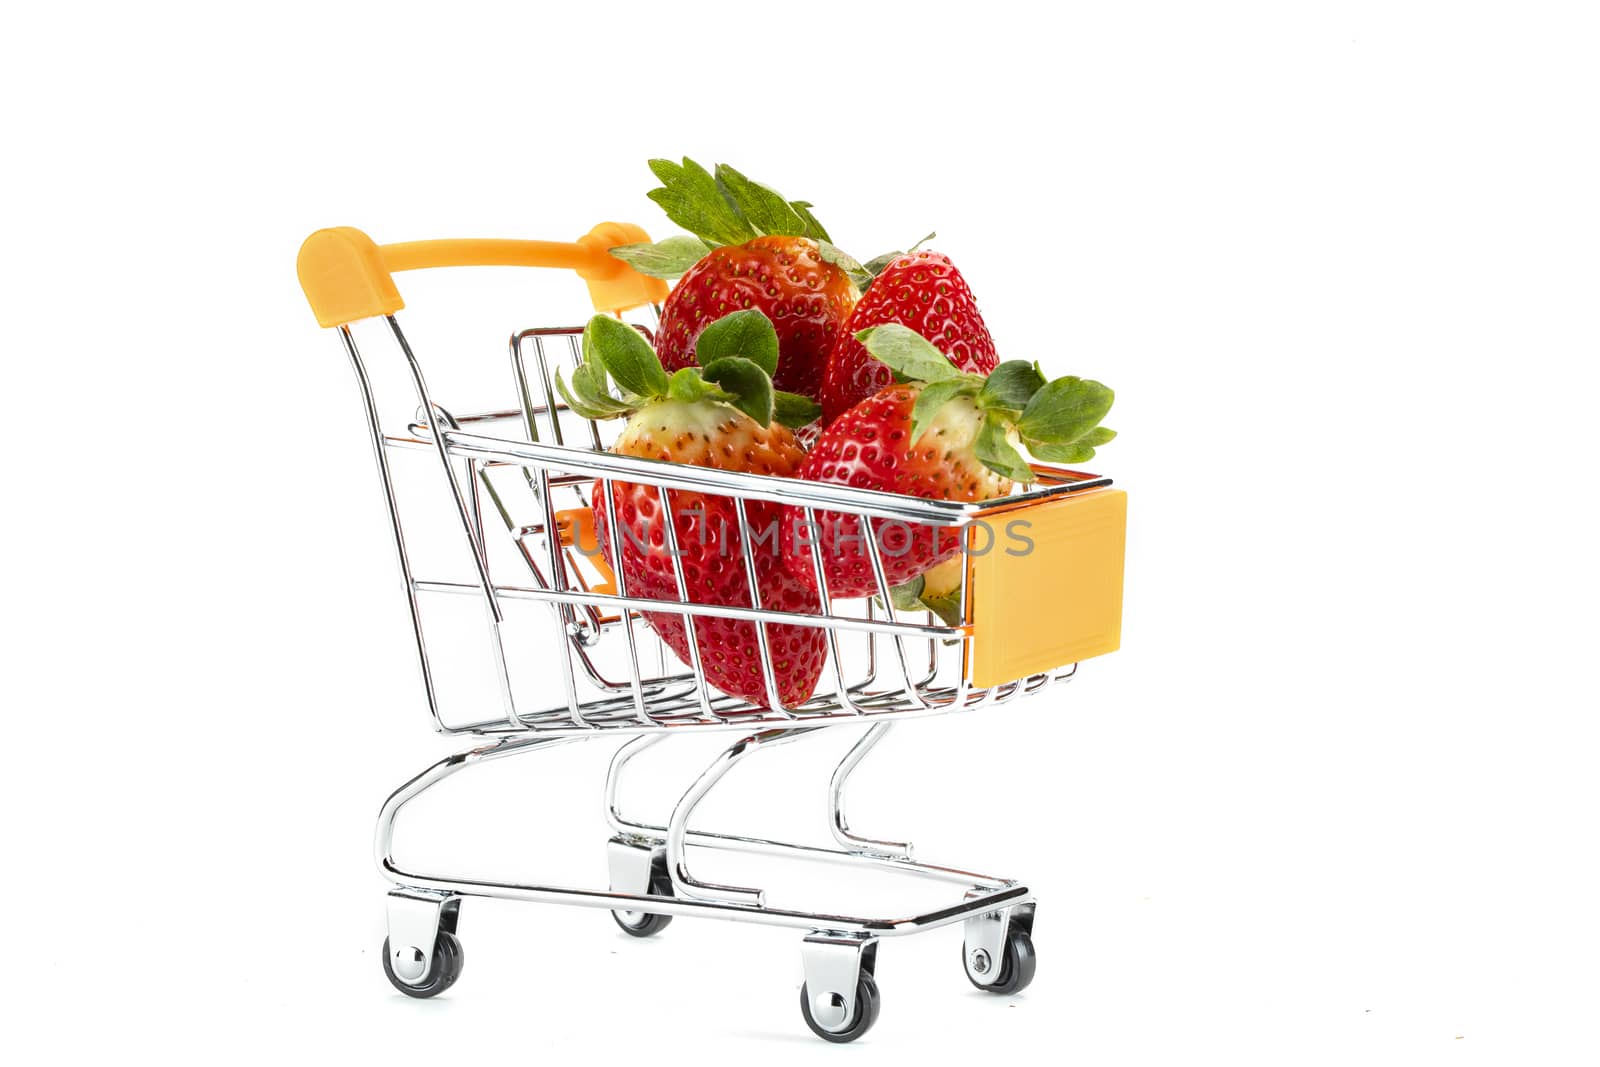 A bunch of red fresh strawberries on a toy shopping cart. Isolated on white background.